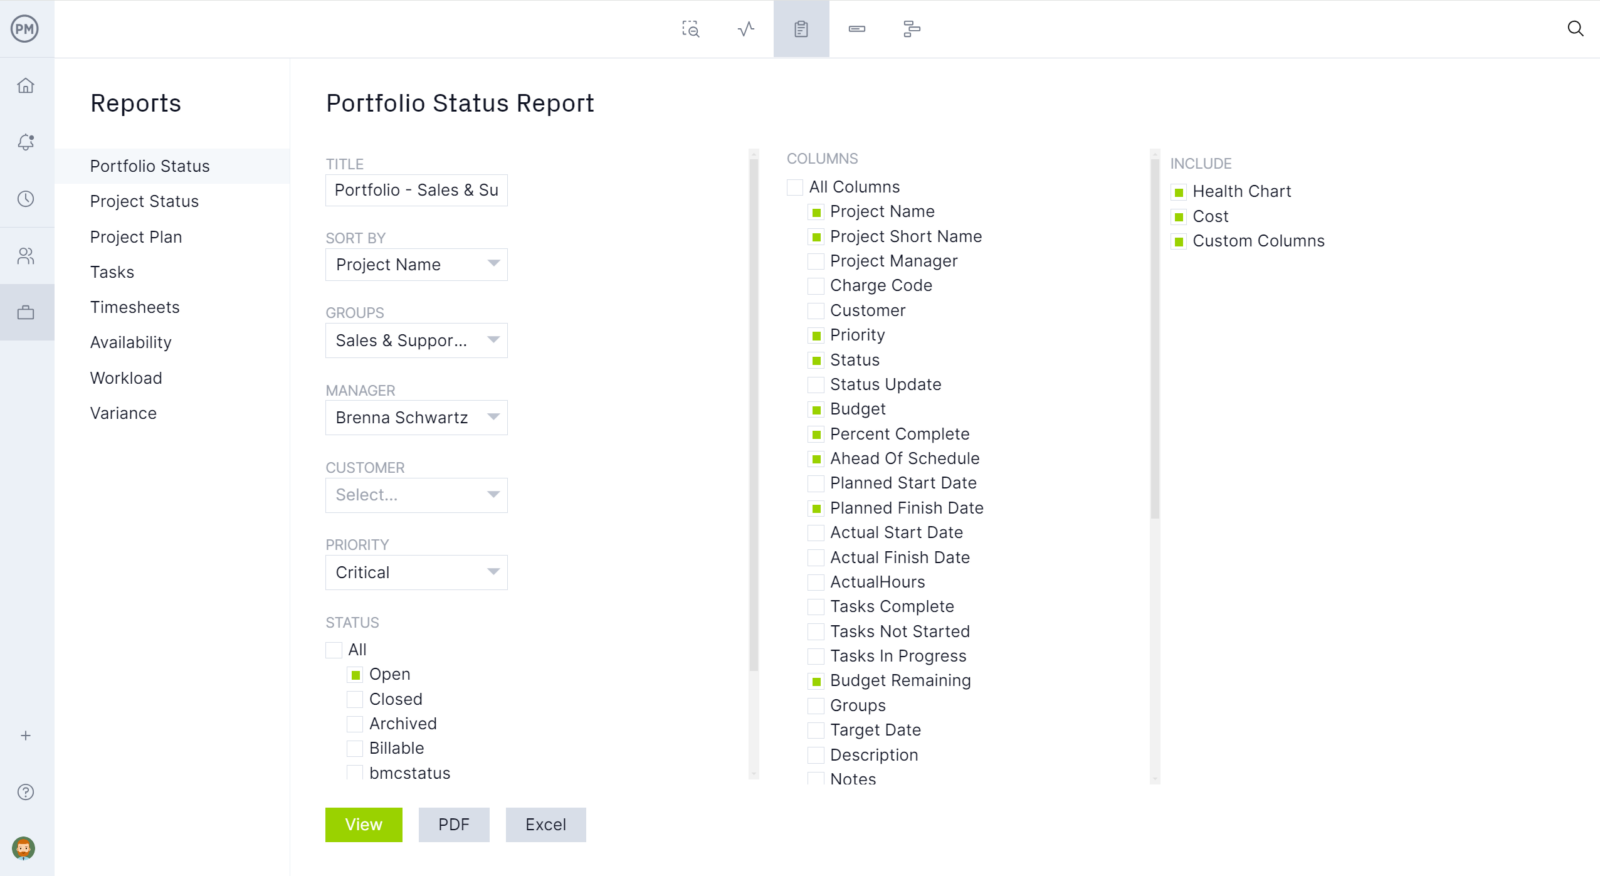 ProjectManager's reports help fast track projects